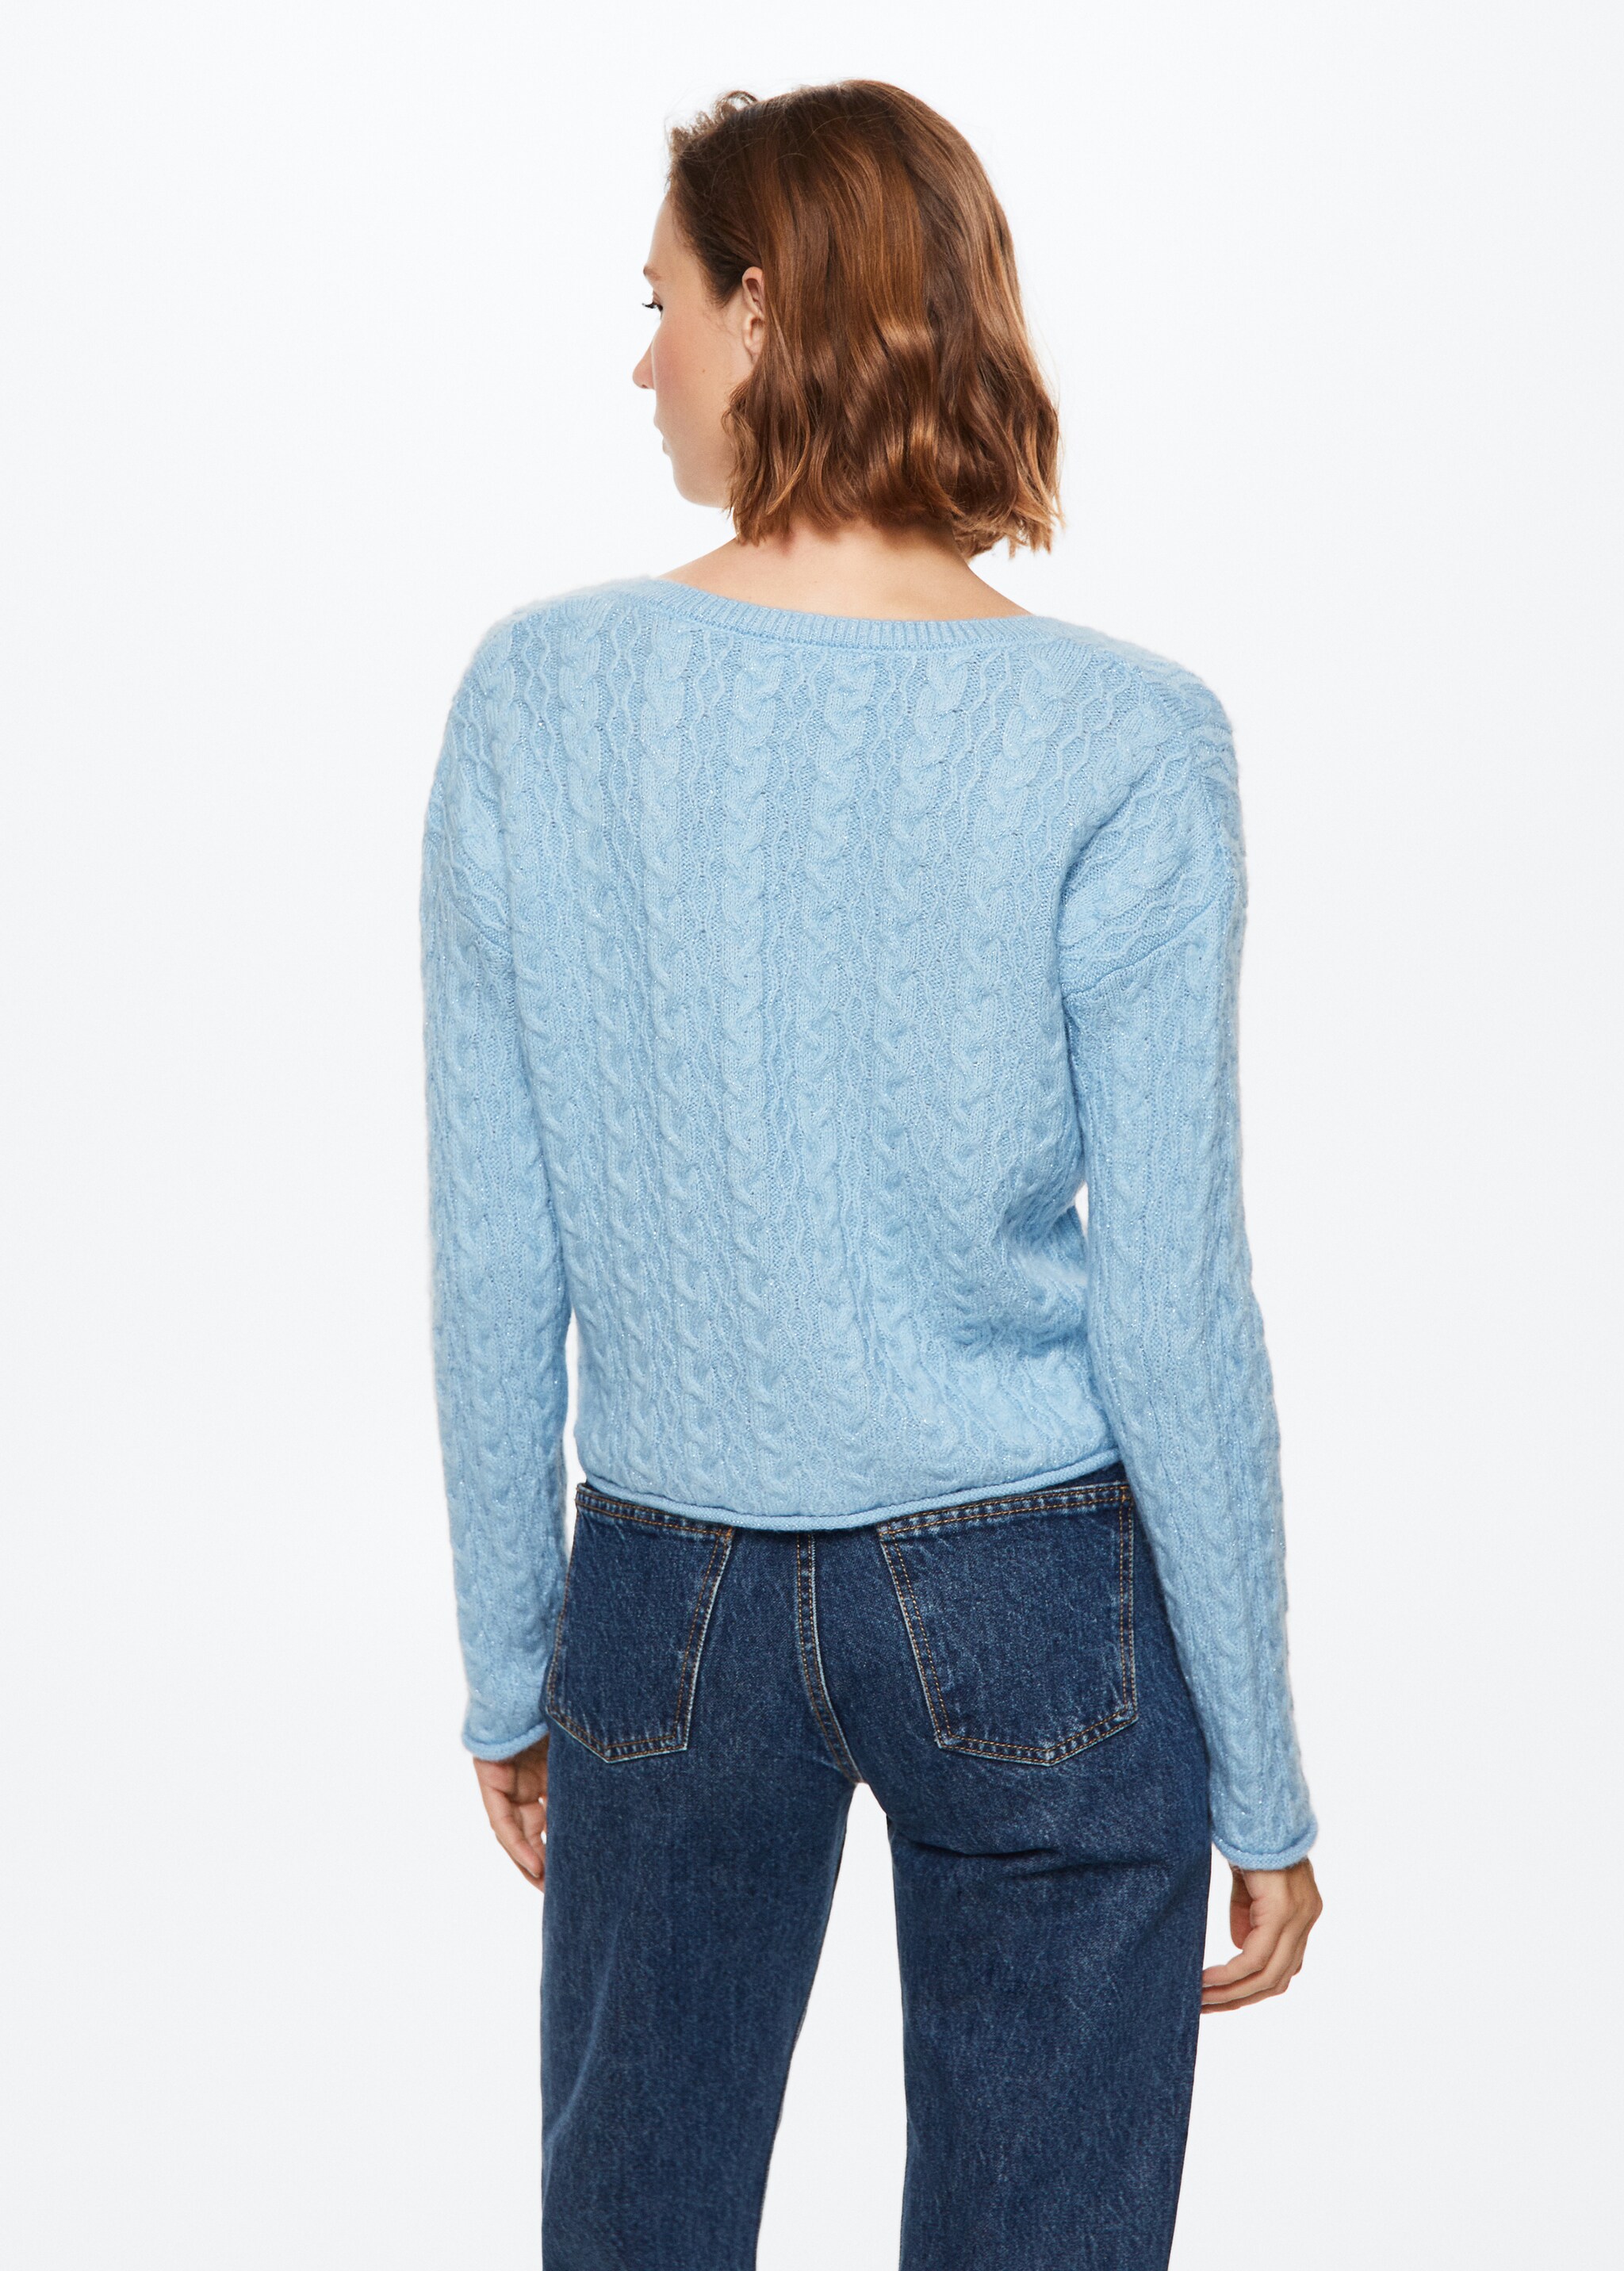 V-neck braided sweater - Reverse of the article